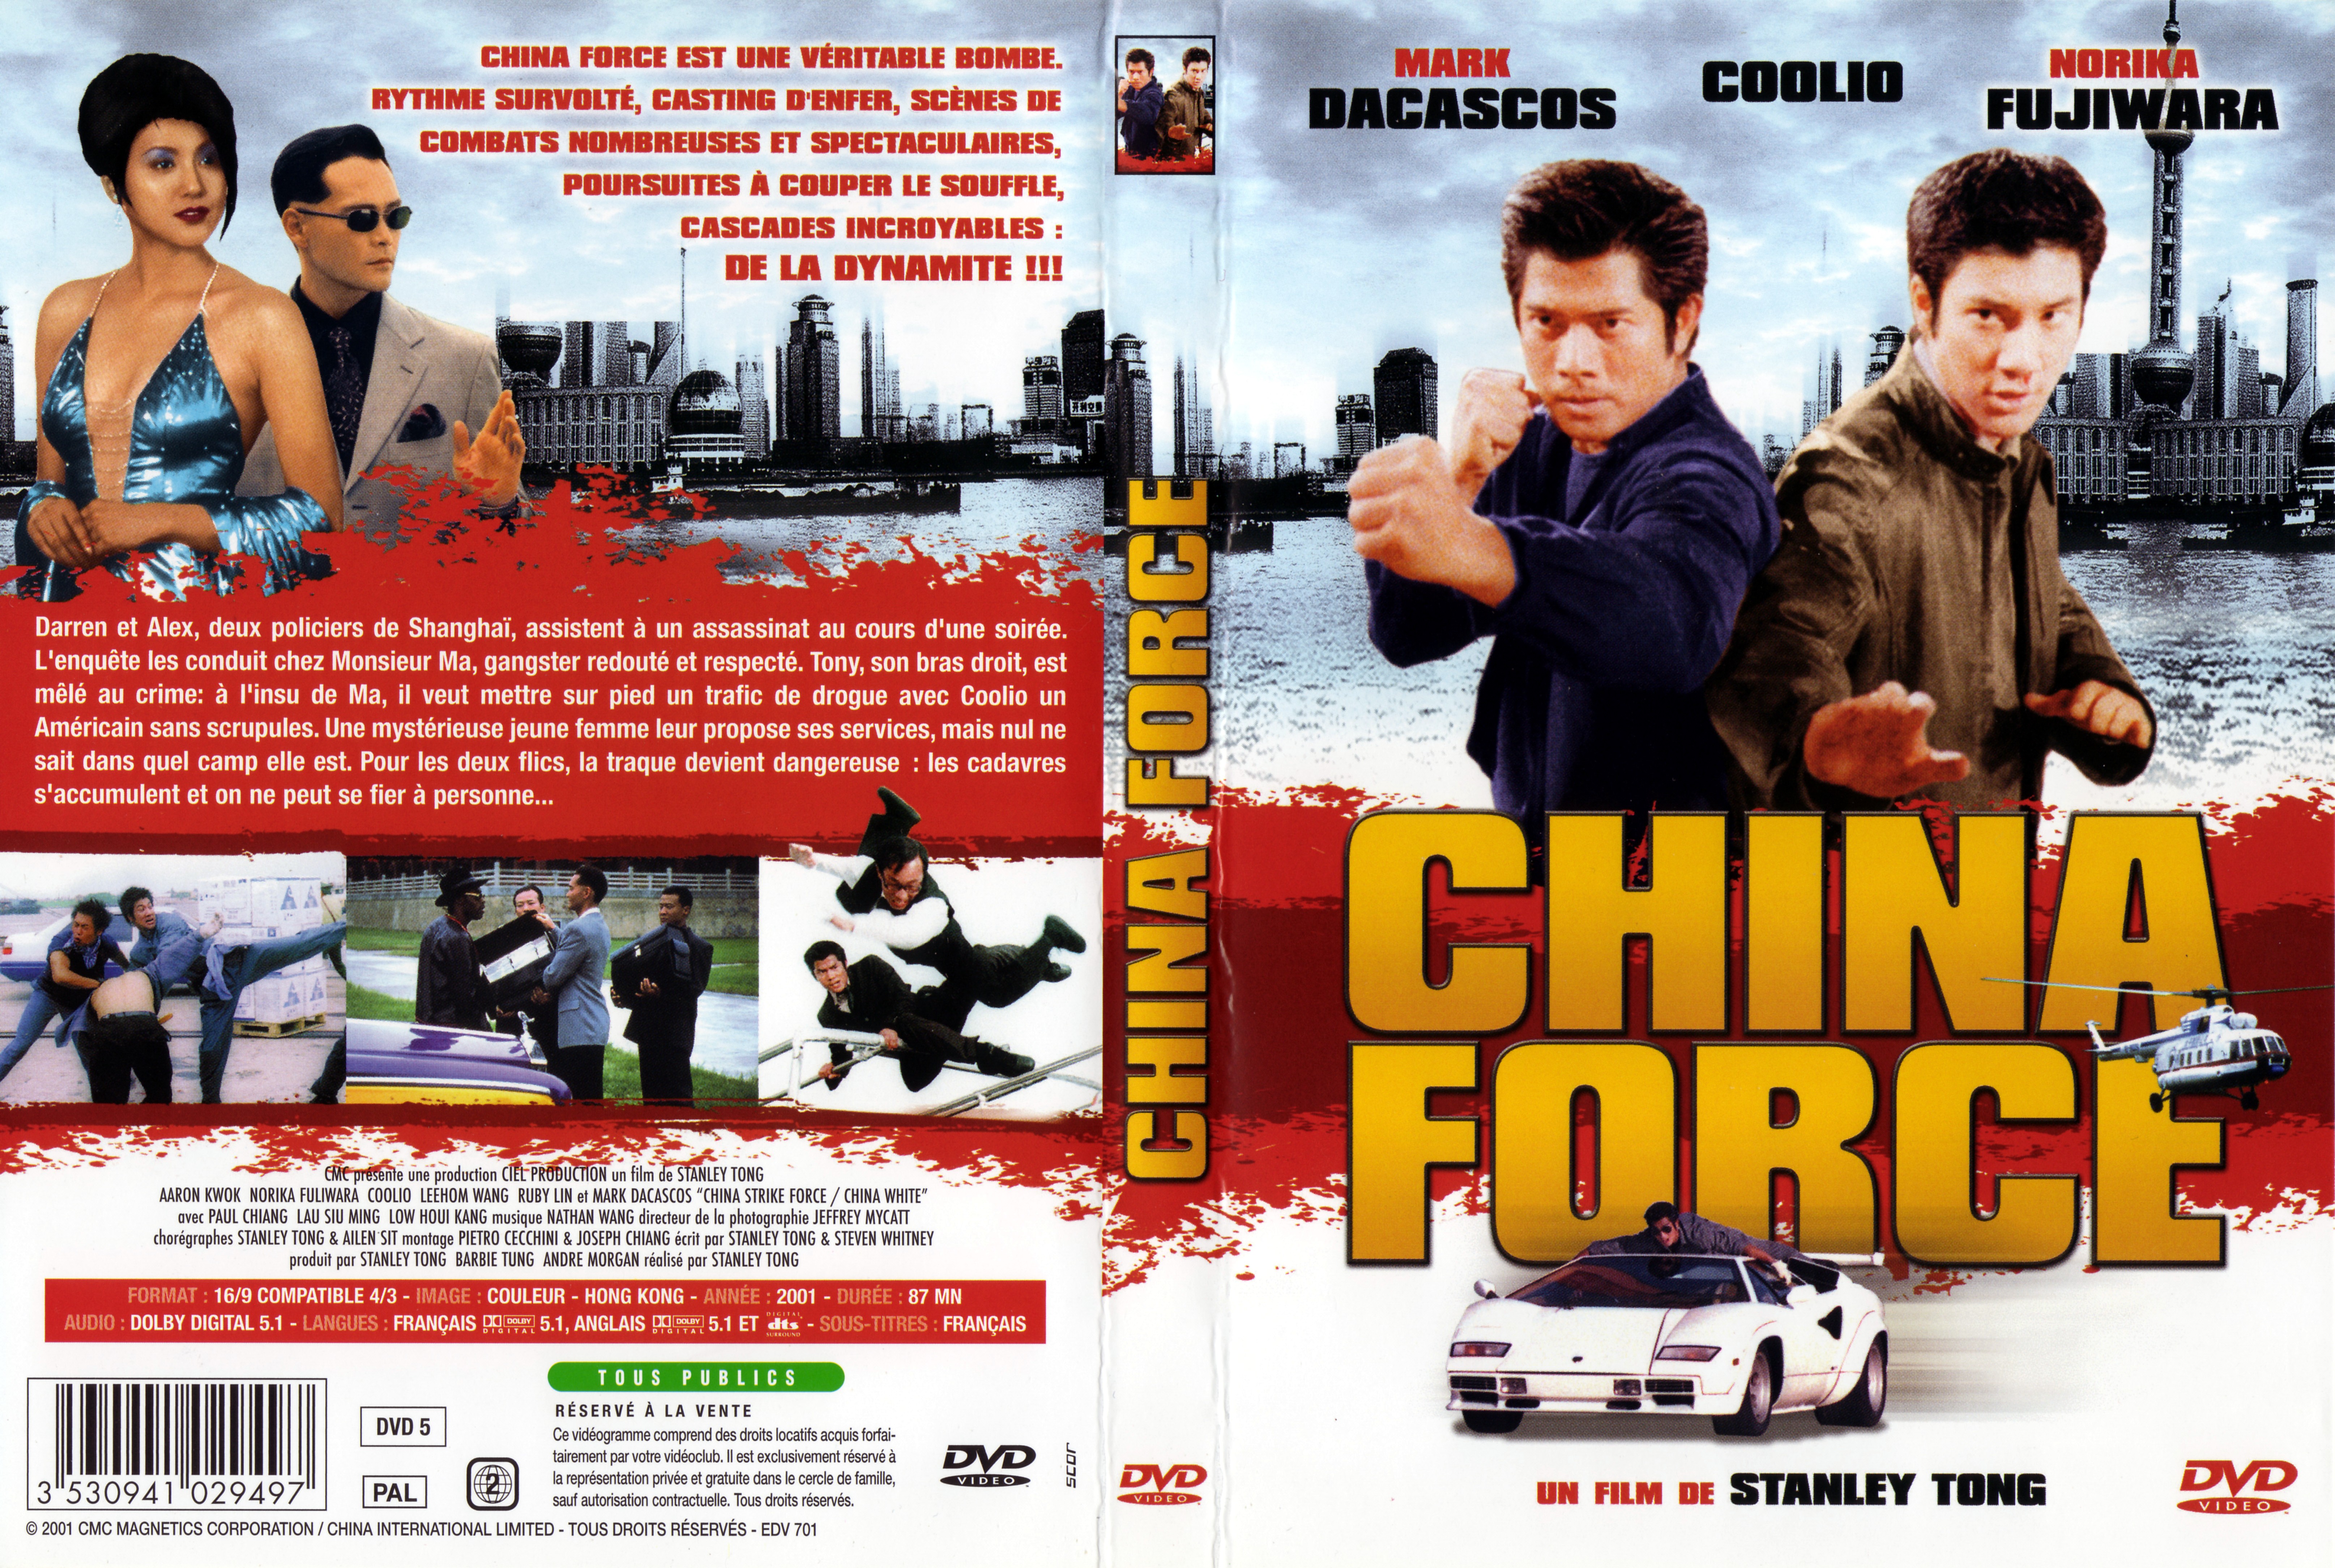 Jaquette DVD China force